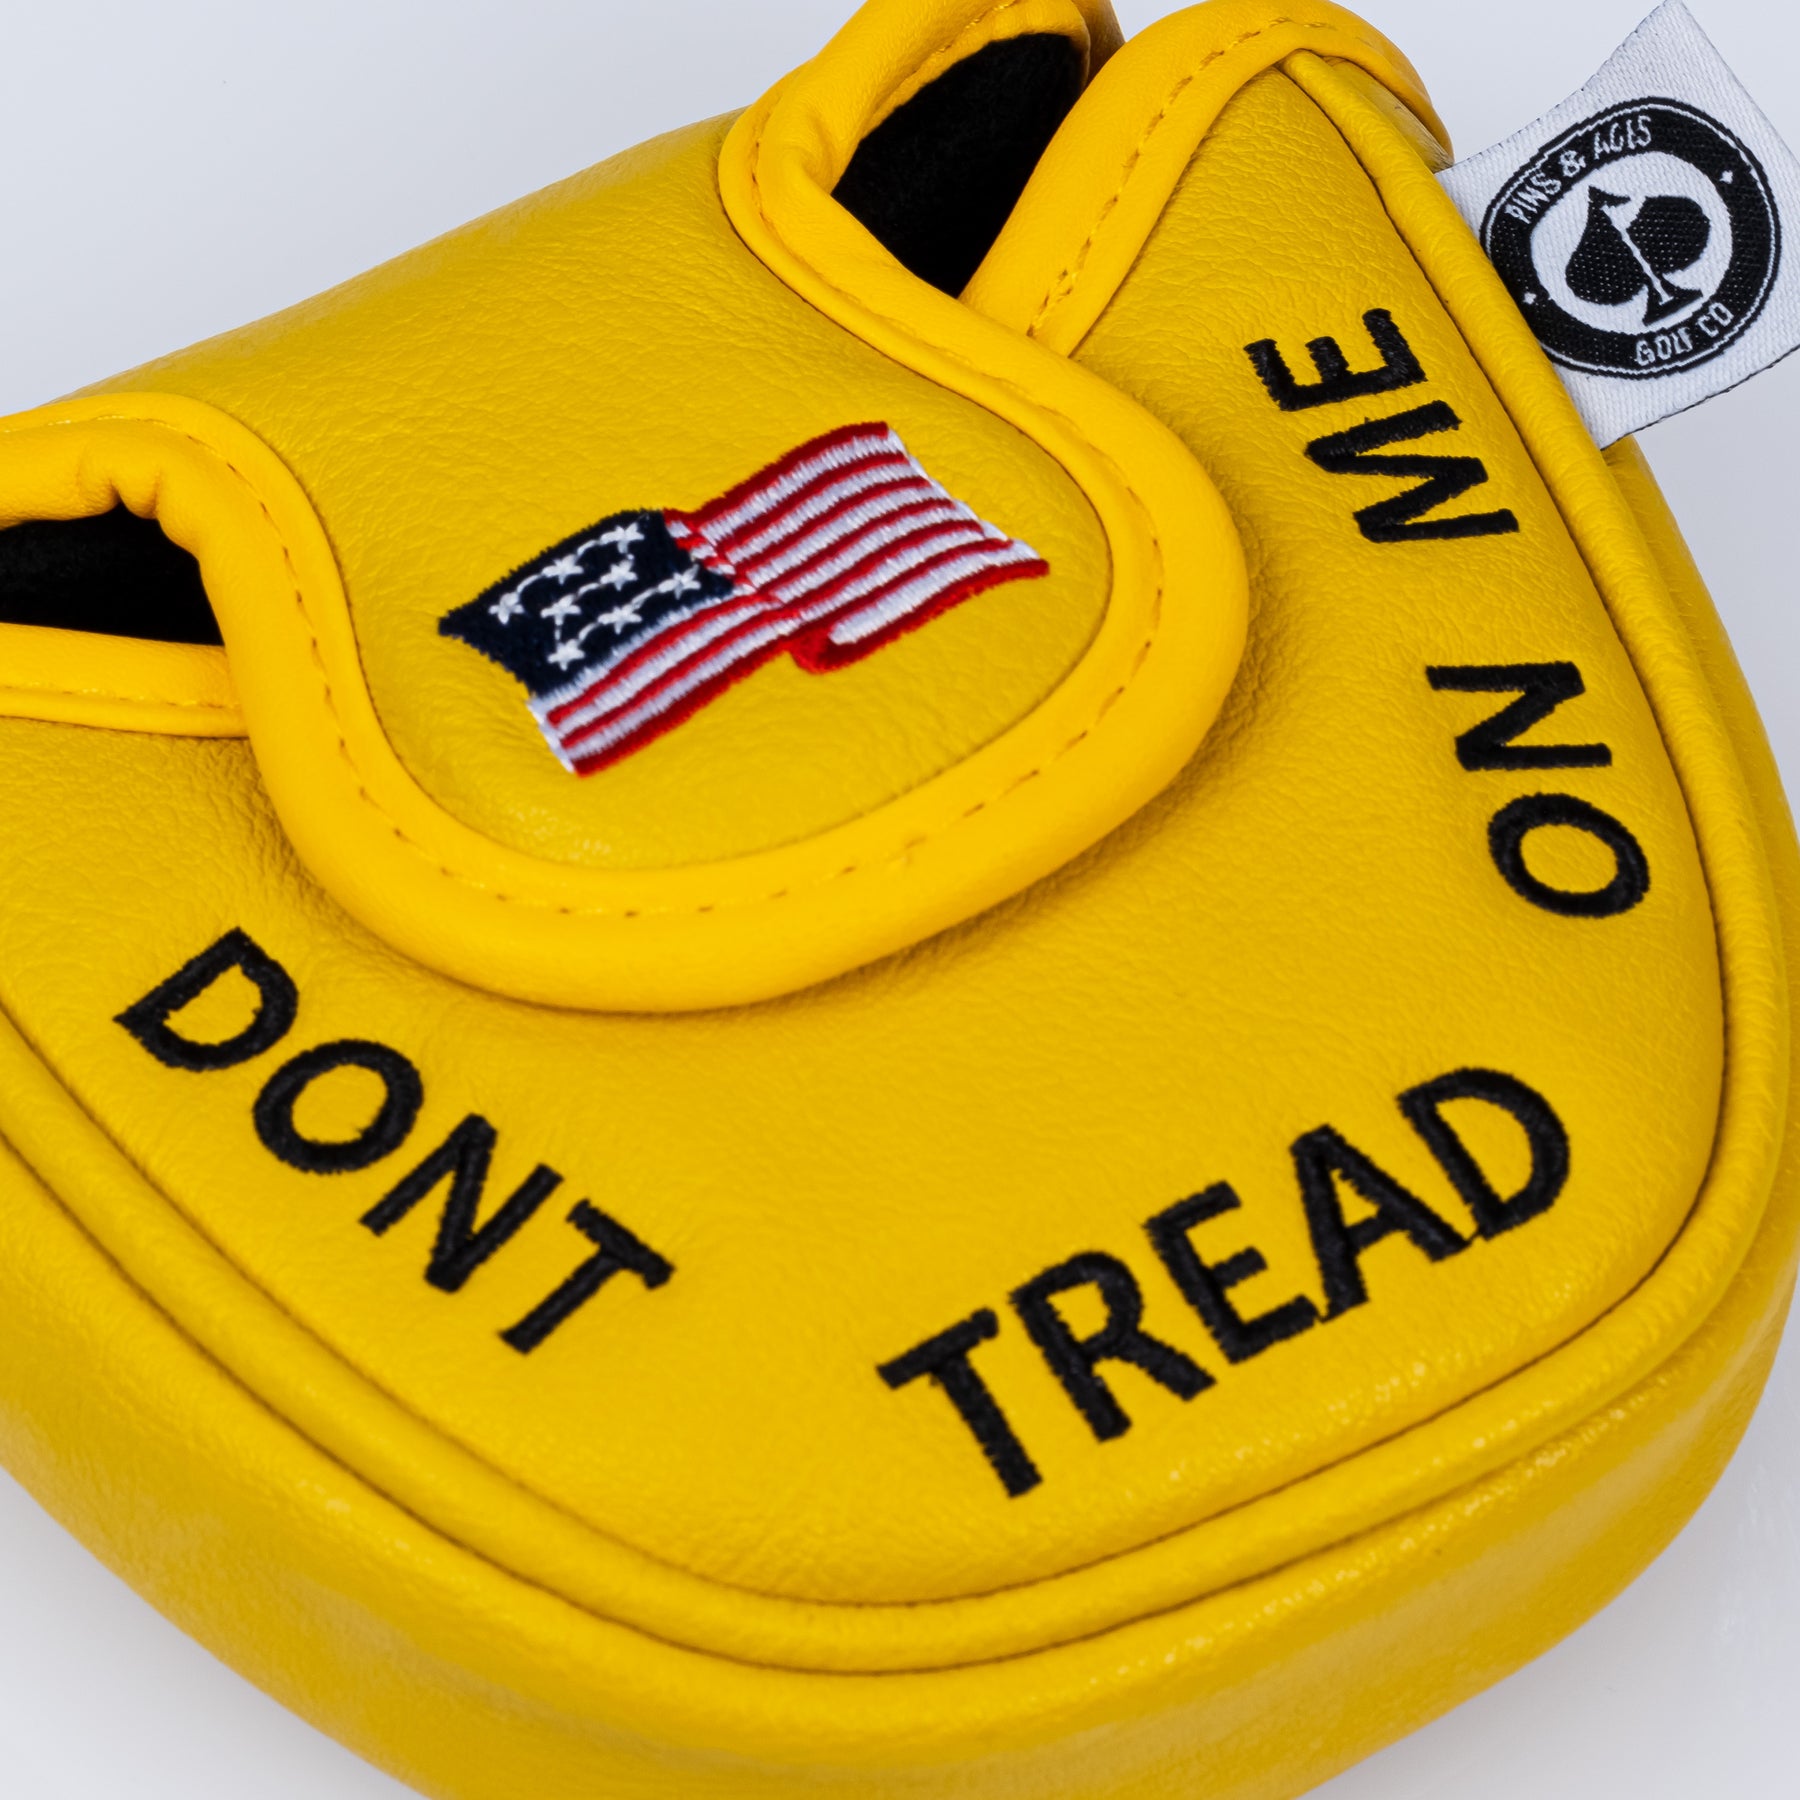 DONT TREAD ON ME - Mallet Putter Cover